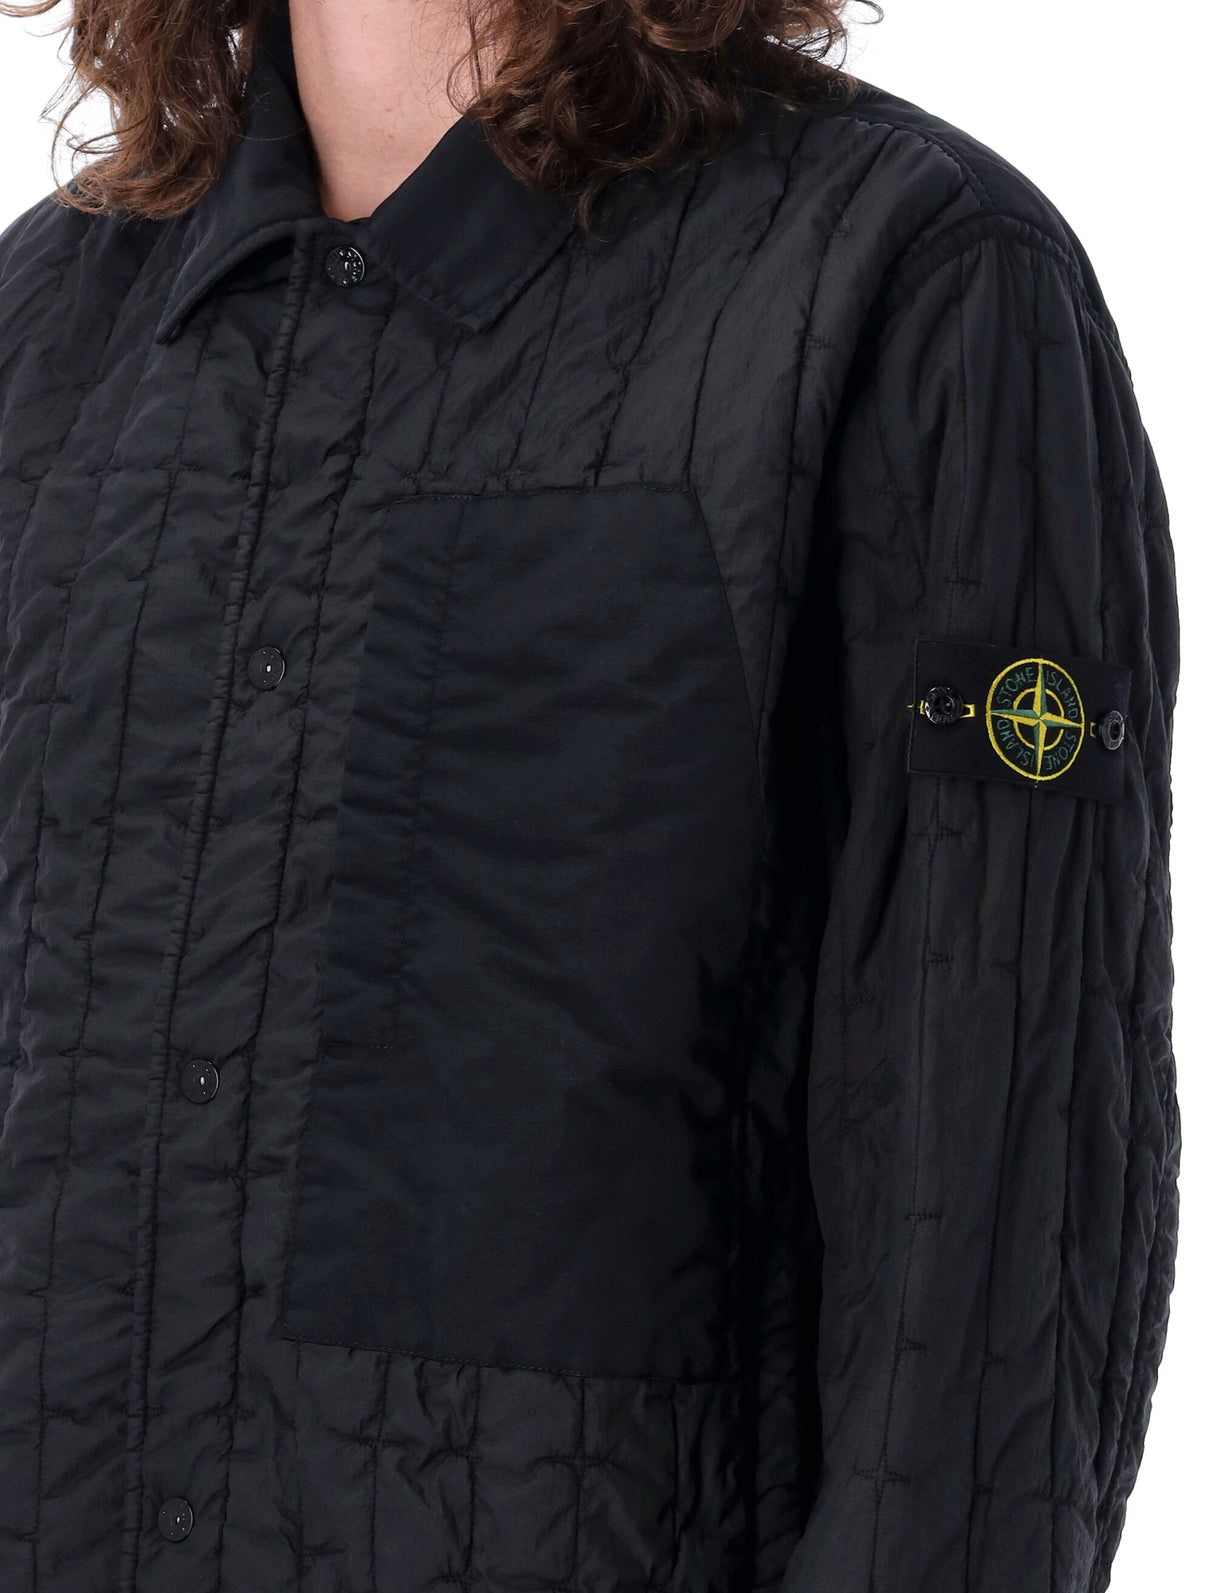 STONE ISLAND Black Quilted Shirt-Jacket for Men - SS24